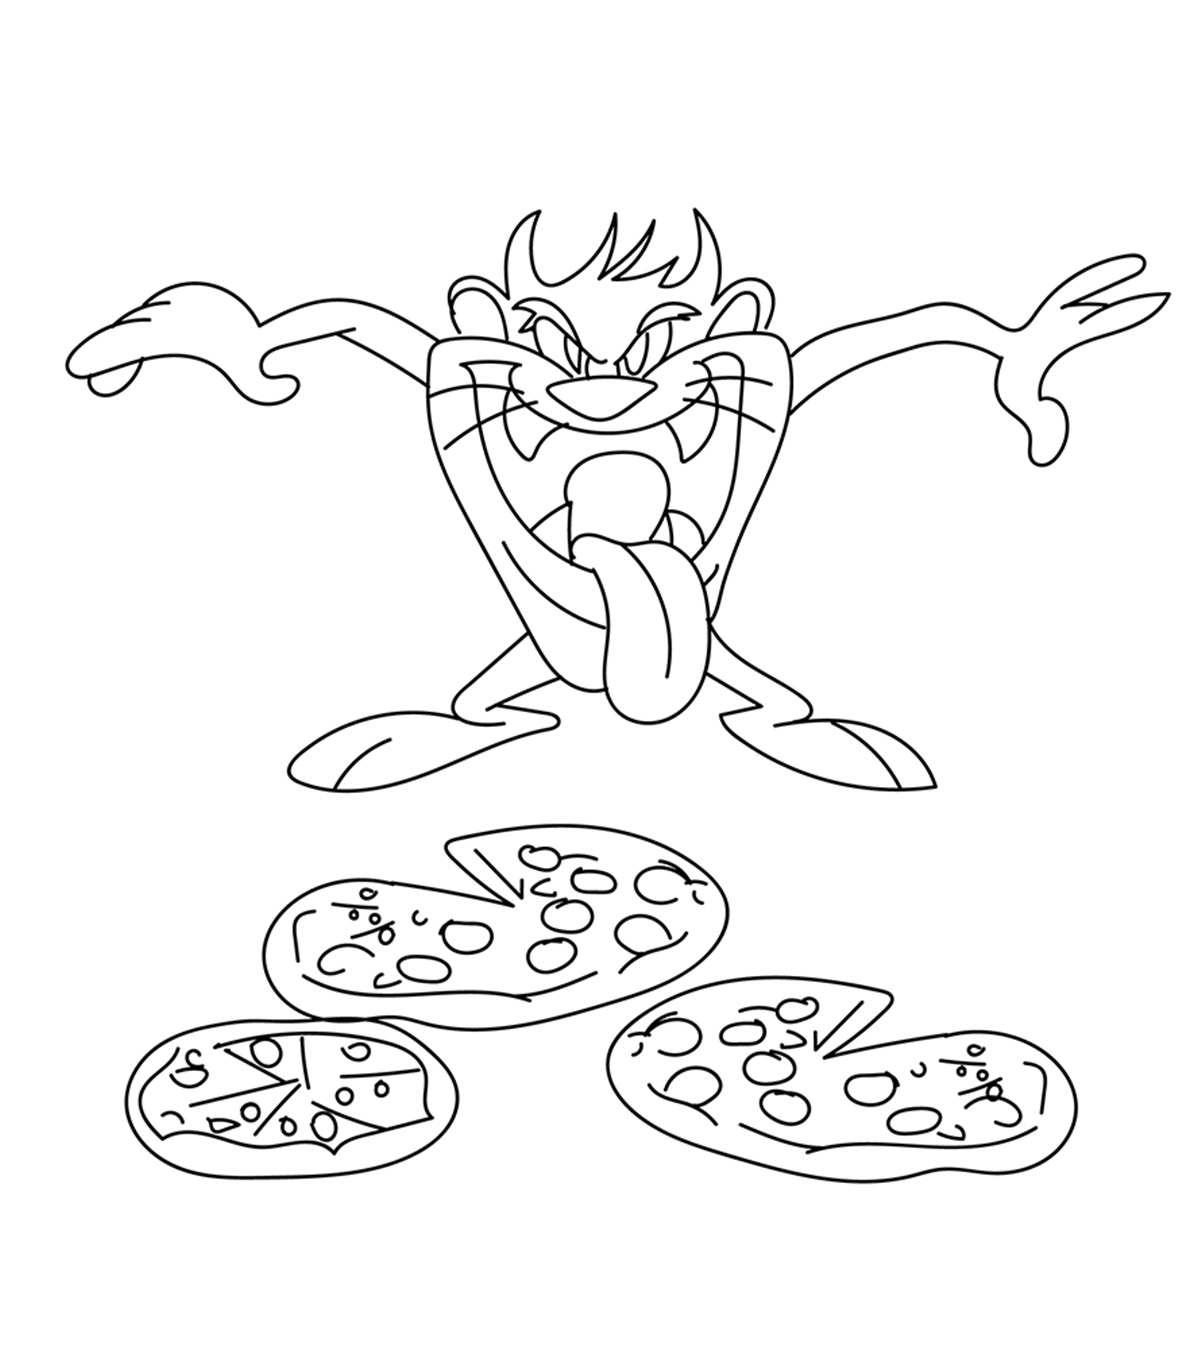 10 Best Pizza Coloring Pages For Your Toddler